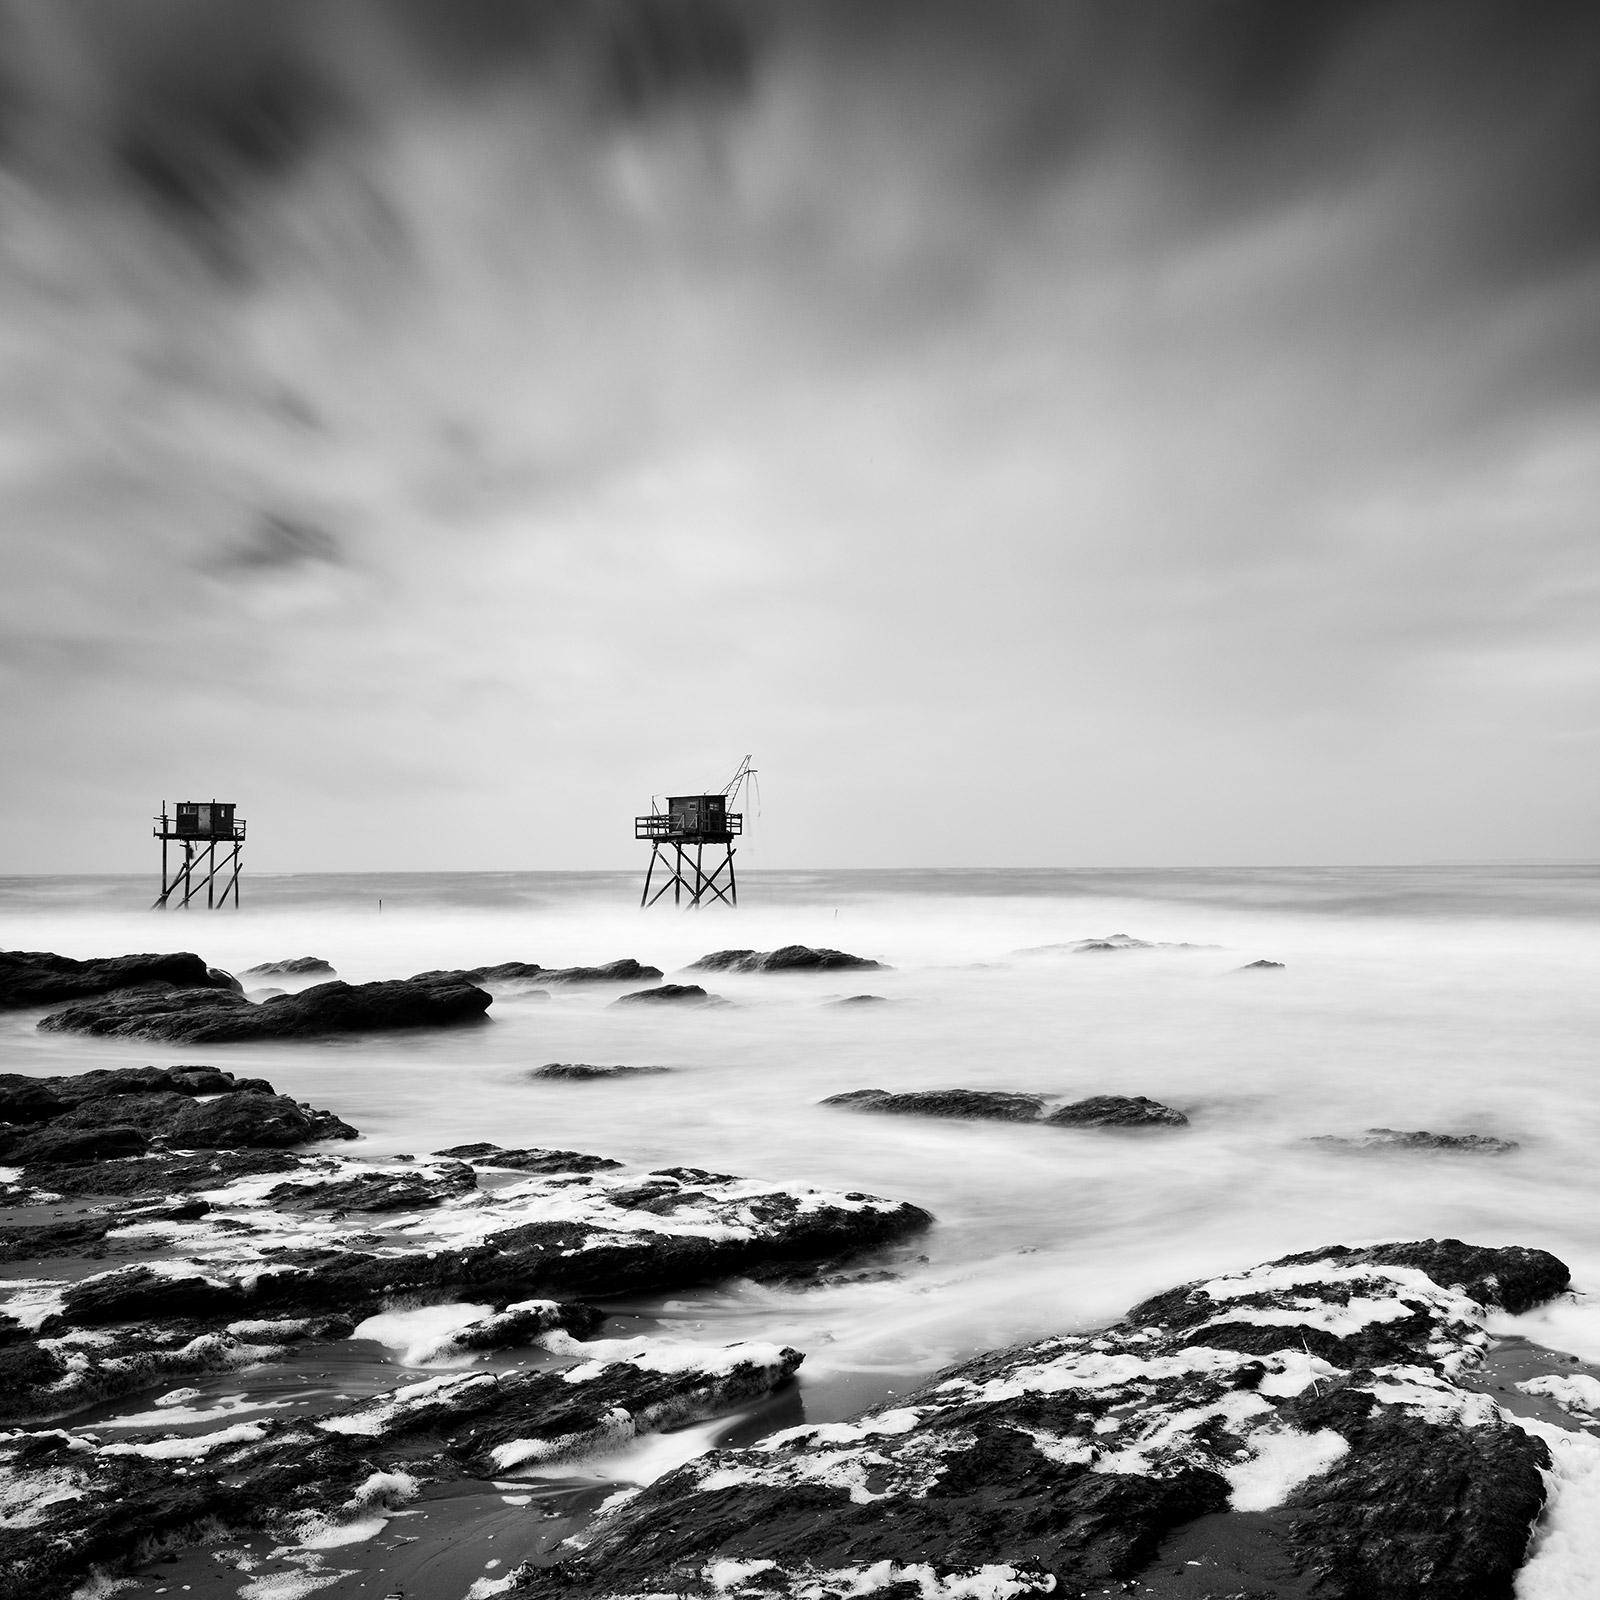 Fishing Hut on Stilts, coast of Atlantic Ocean, black and white waterscape